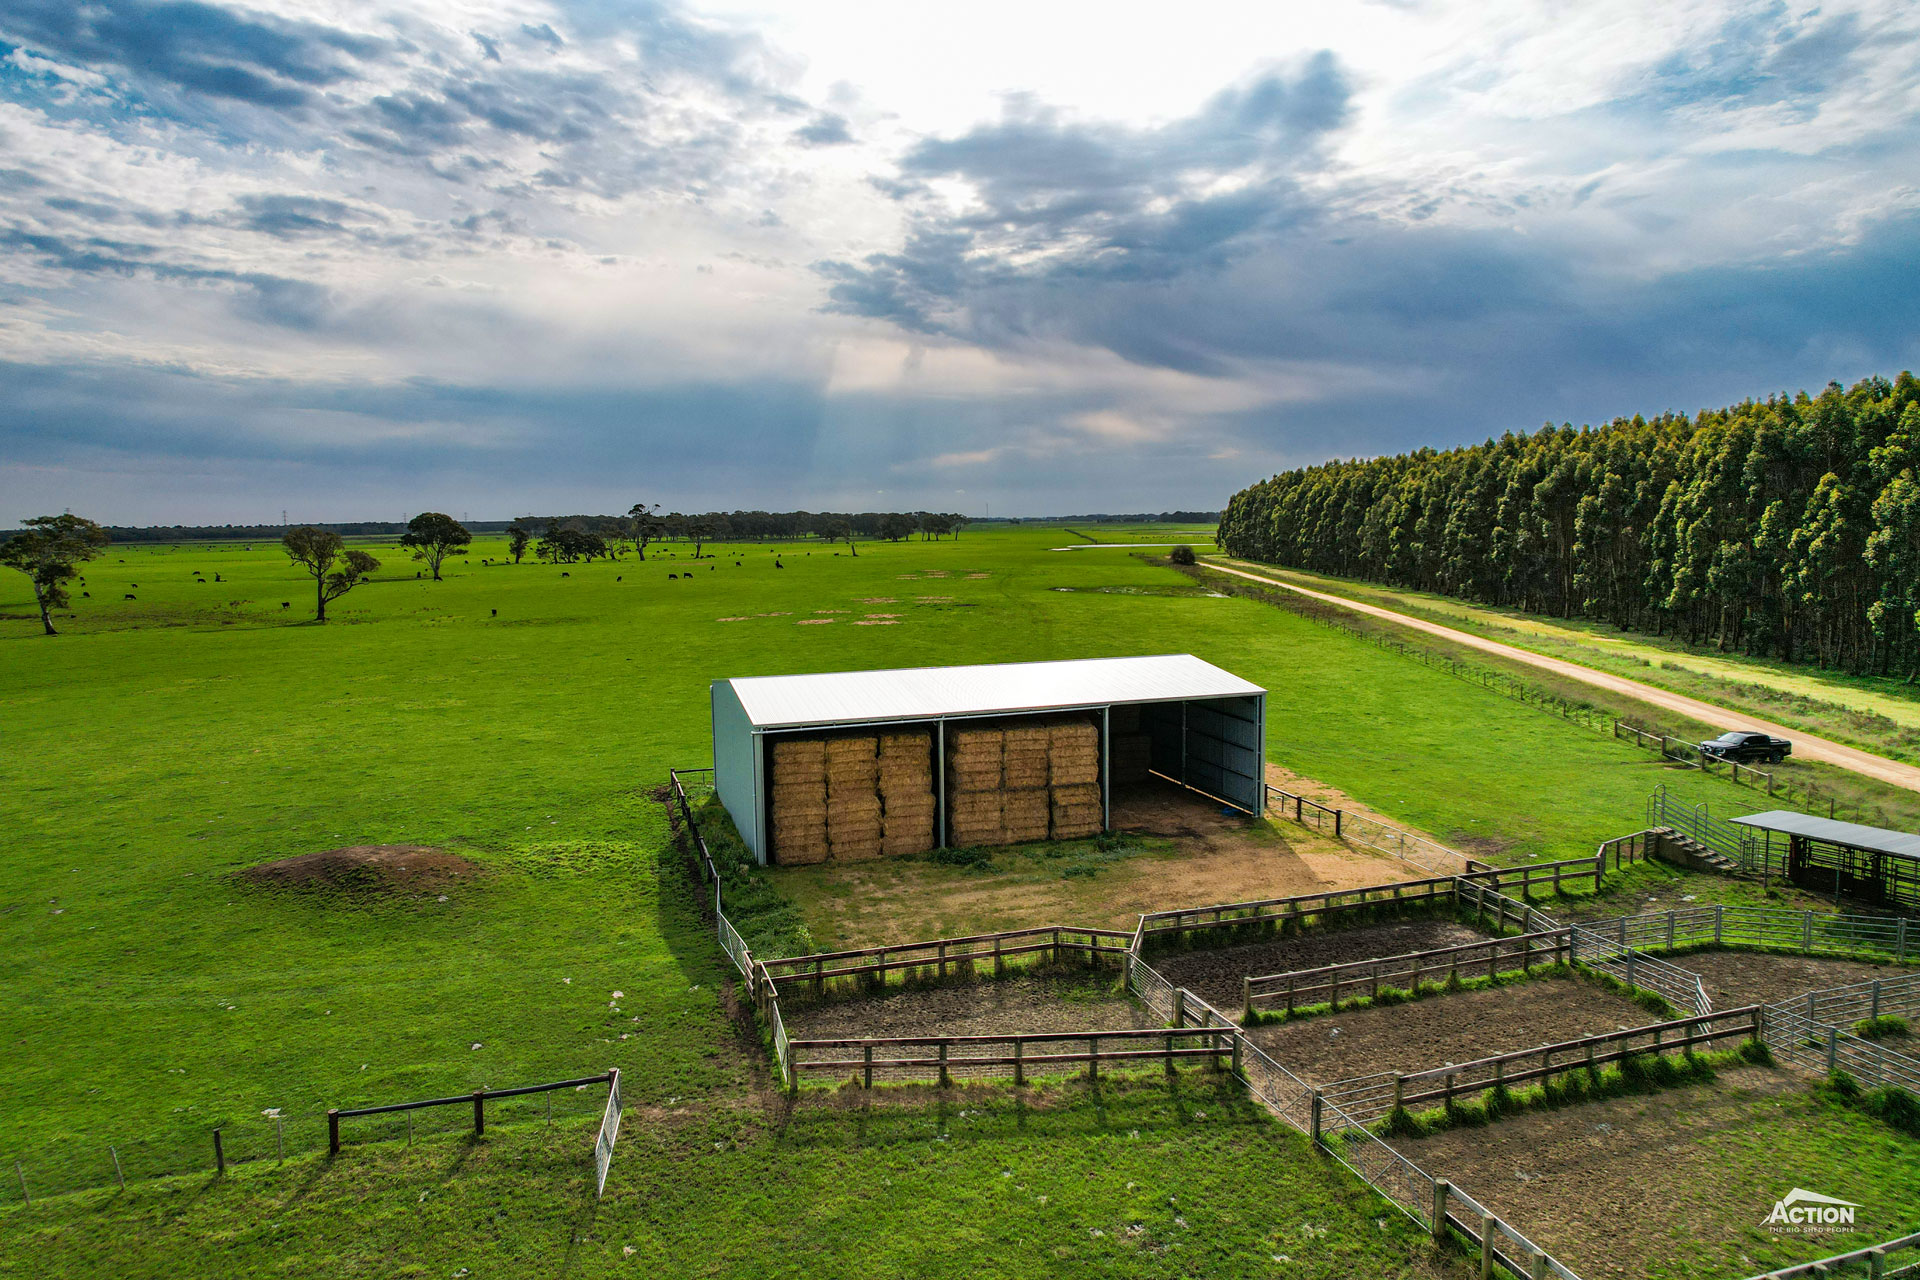 You are currently viewing 24m x 15m x 6m hay shed